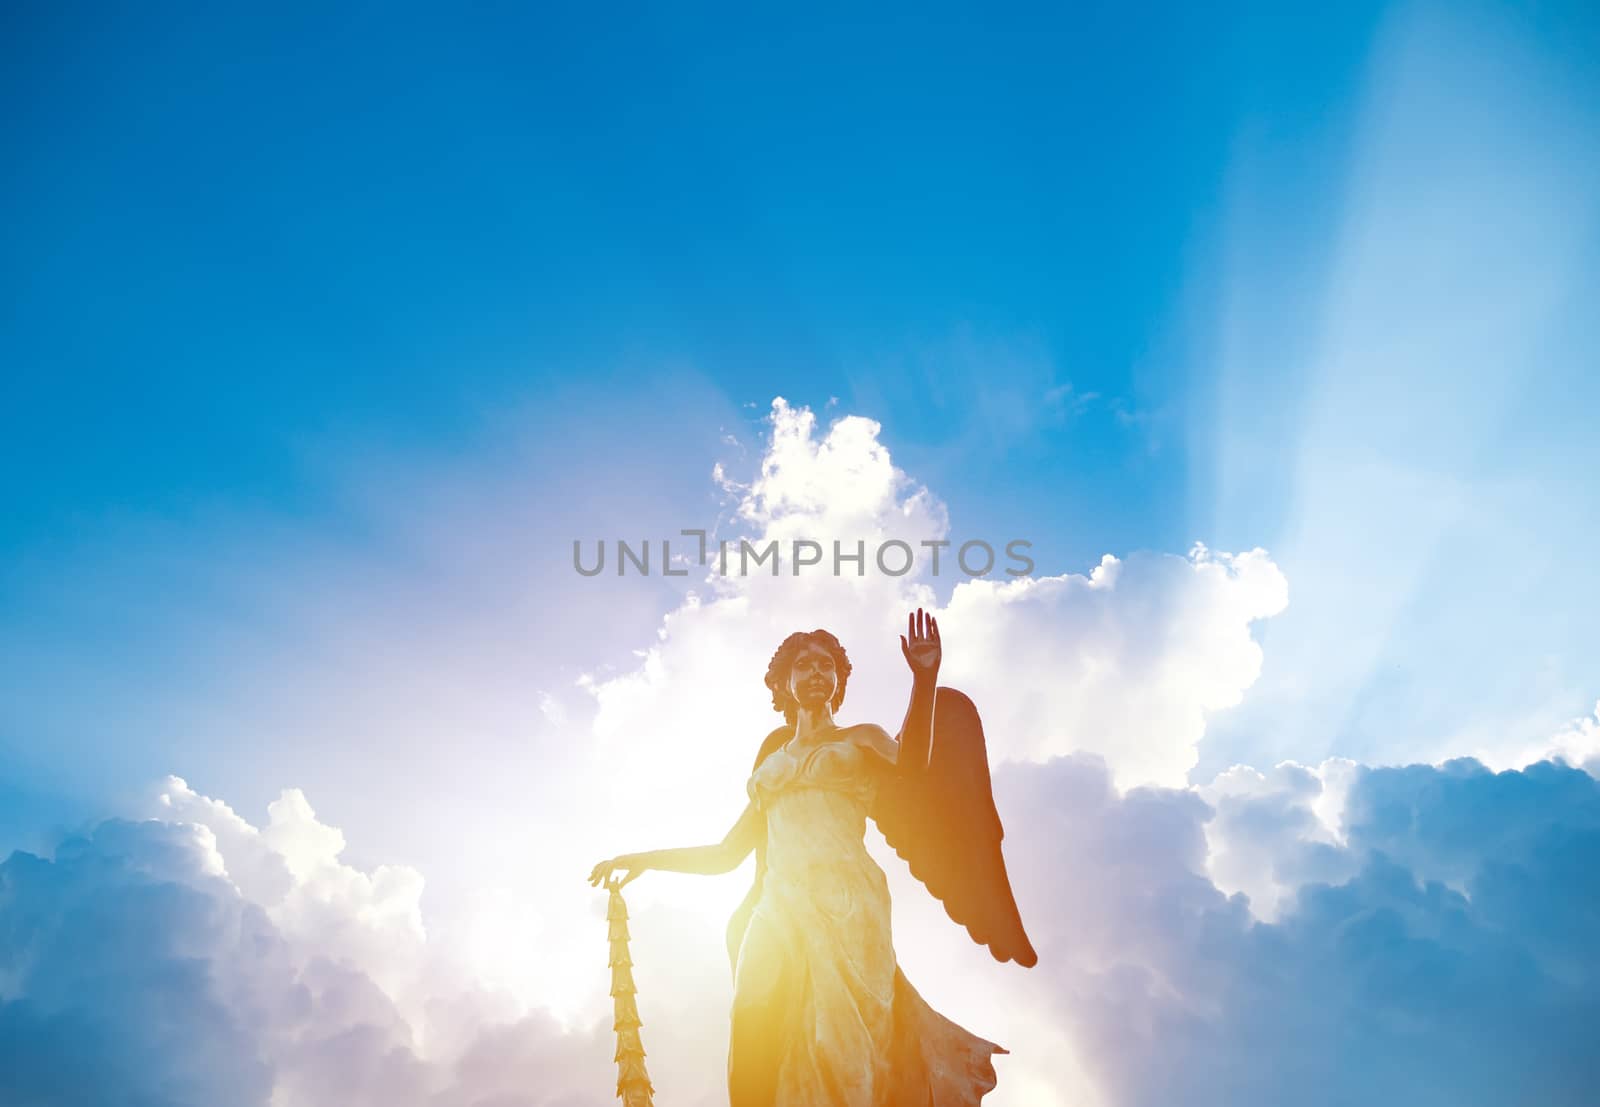 silhouette of angel statue sculpture with sunlight shining behind white cloud with blue sky background